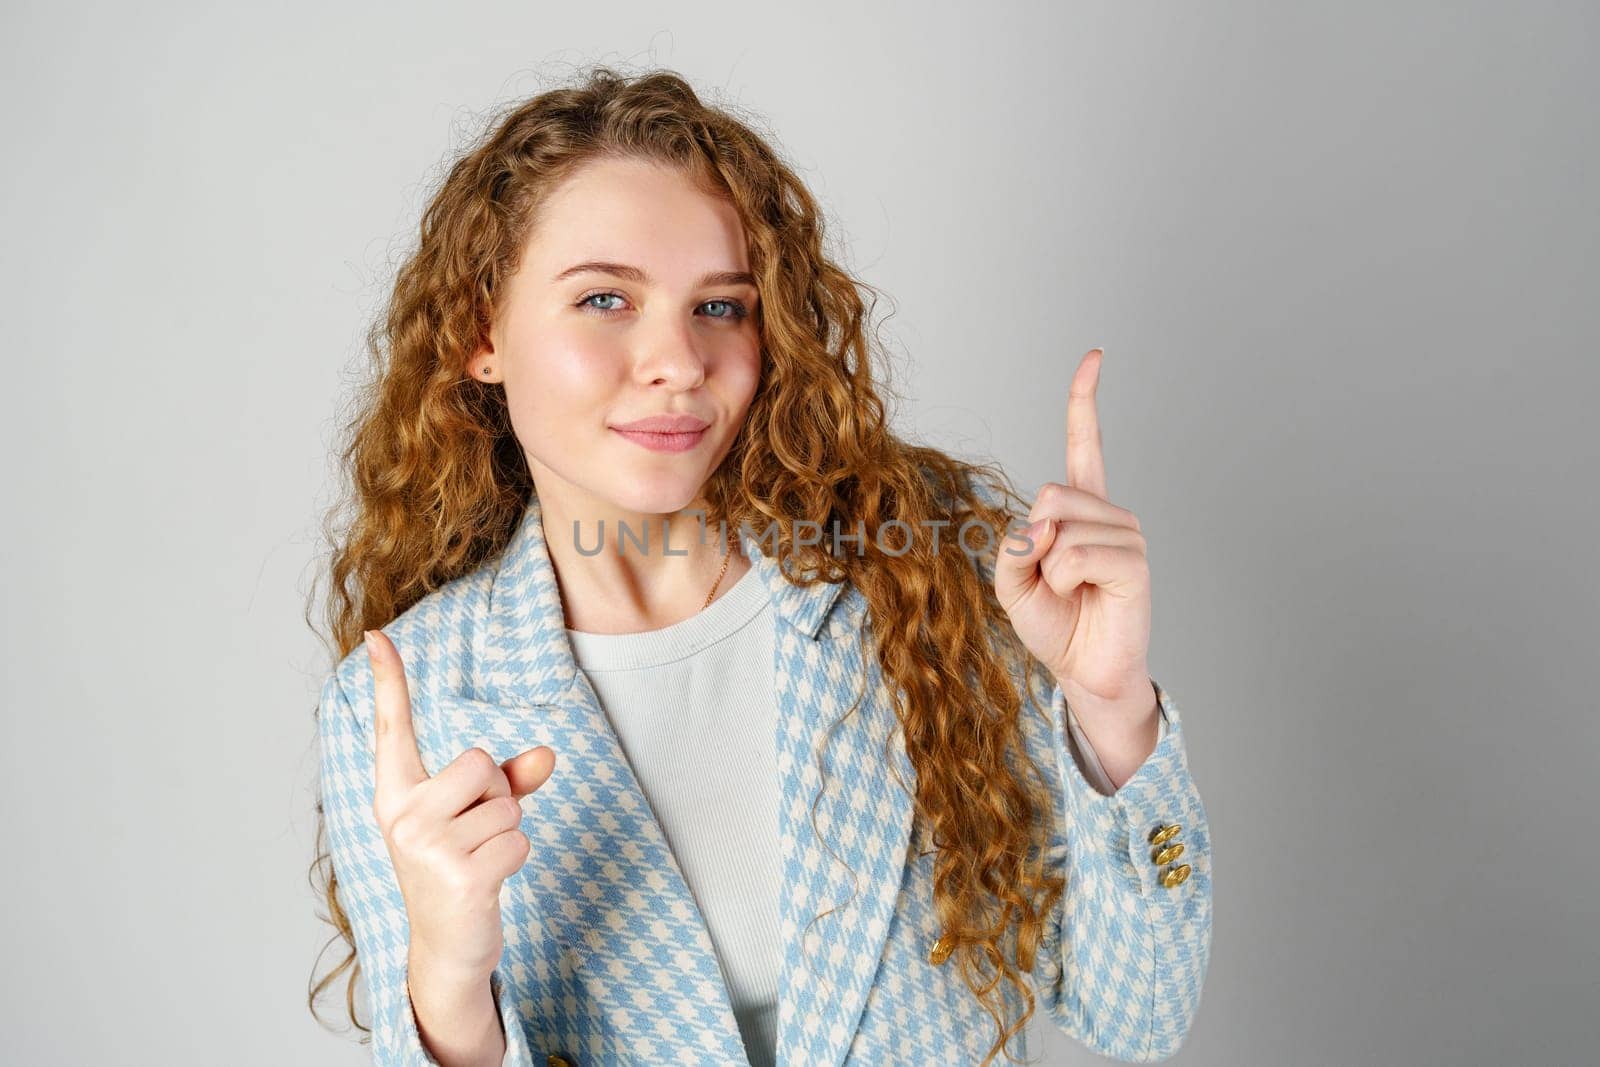 Young Woman With Curly Hair Pointing Upwards in a Studio Setting by Fabrikasimf